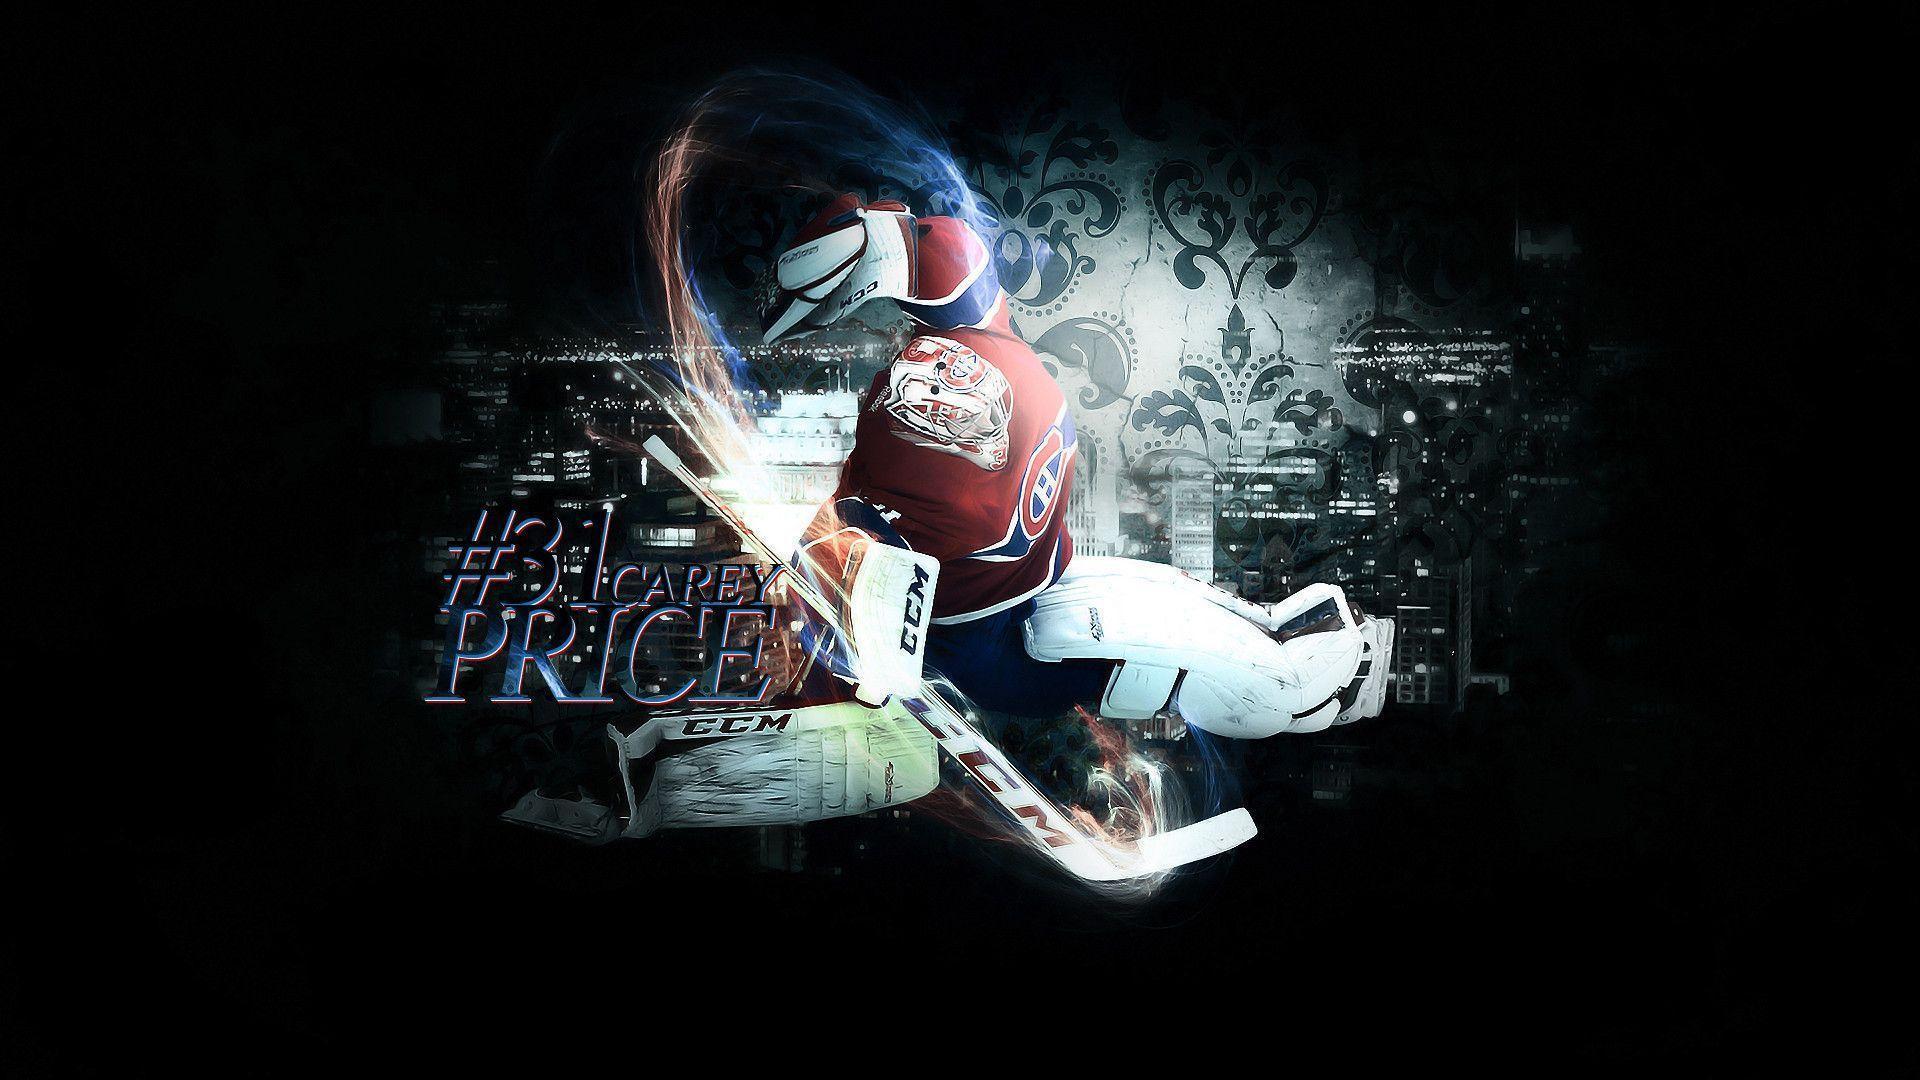 Stoked for season I made this Carey Price Wallpaper